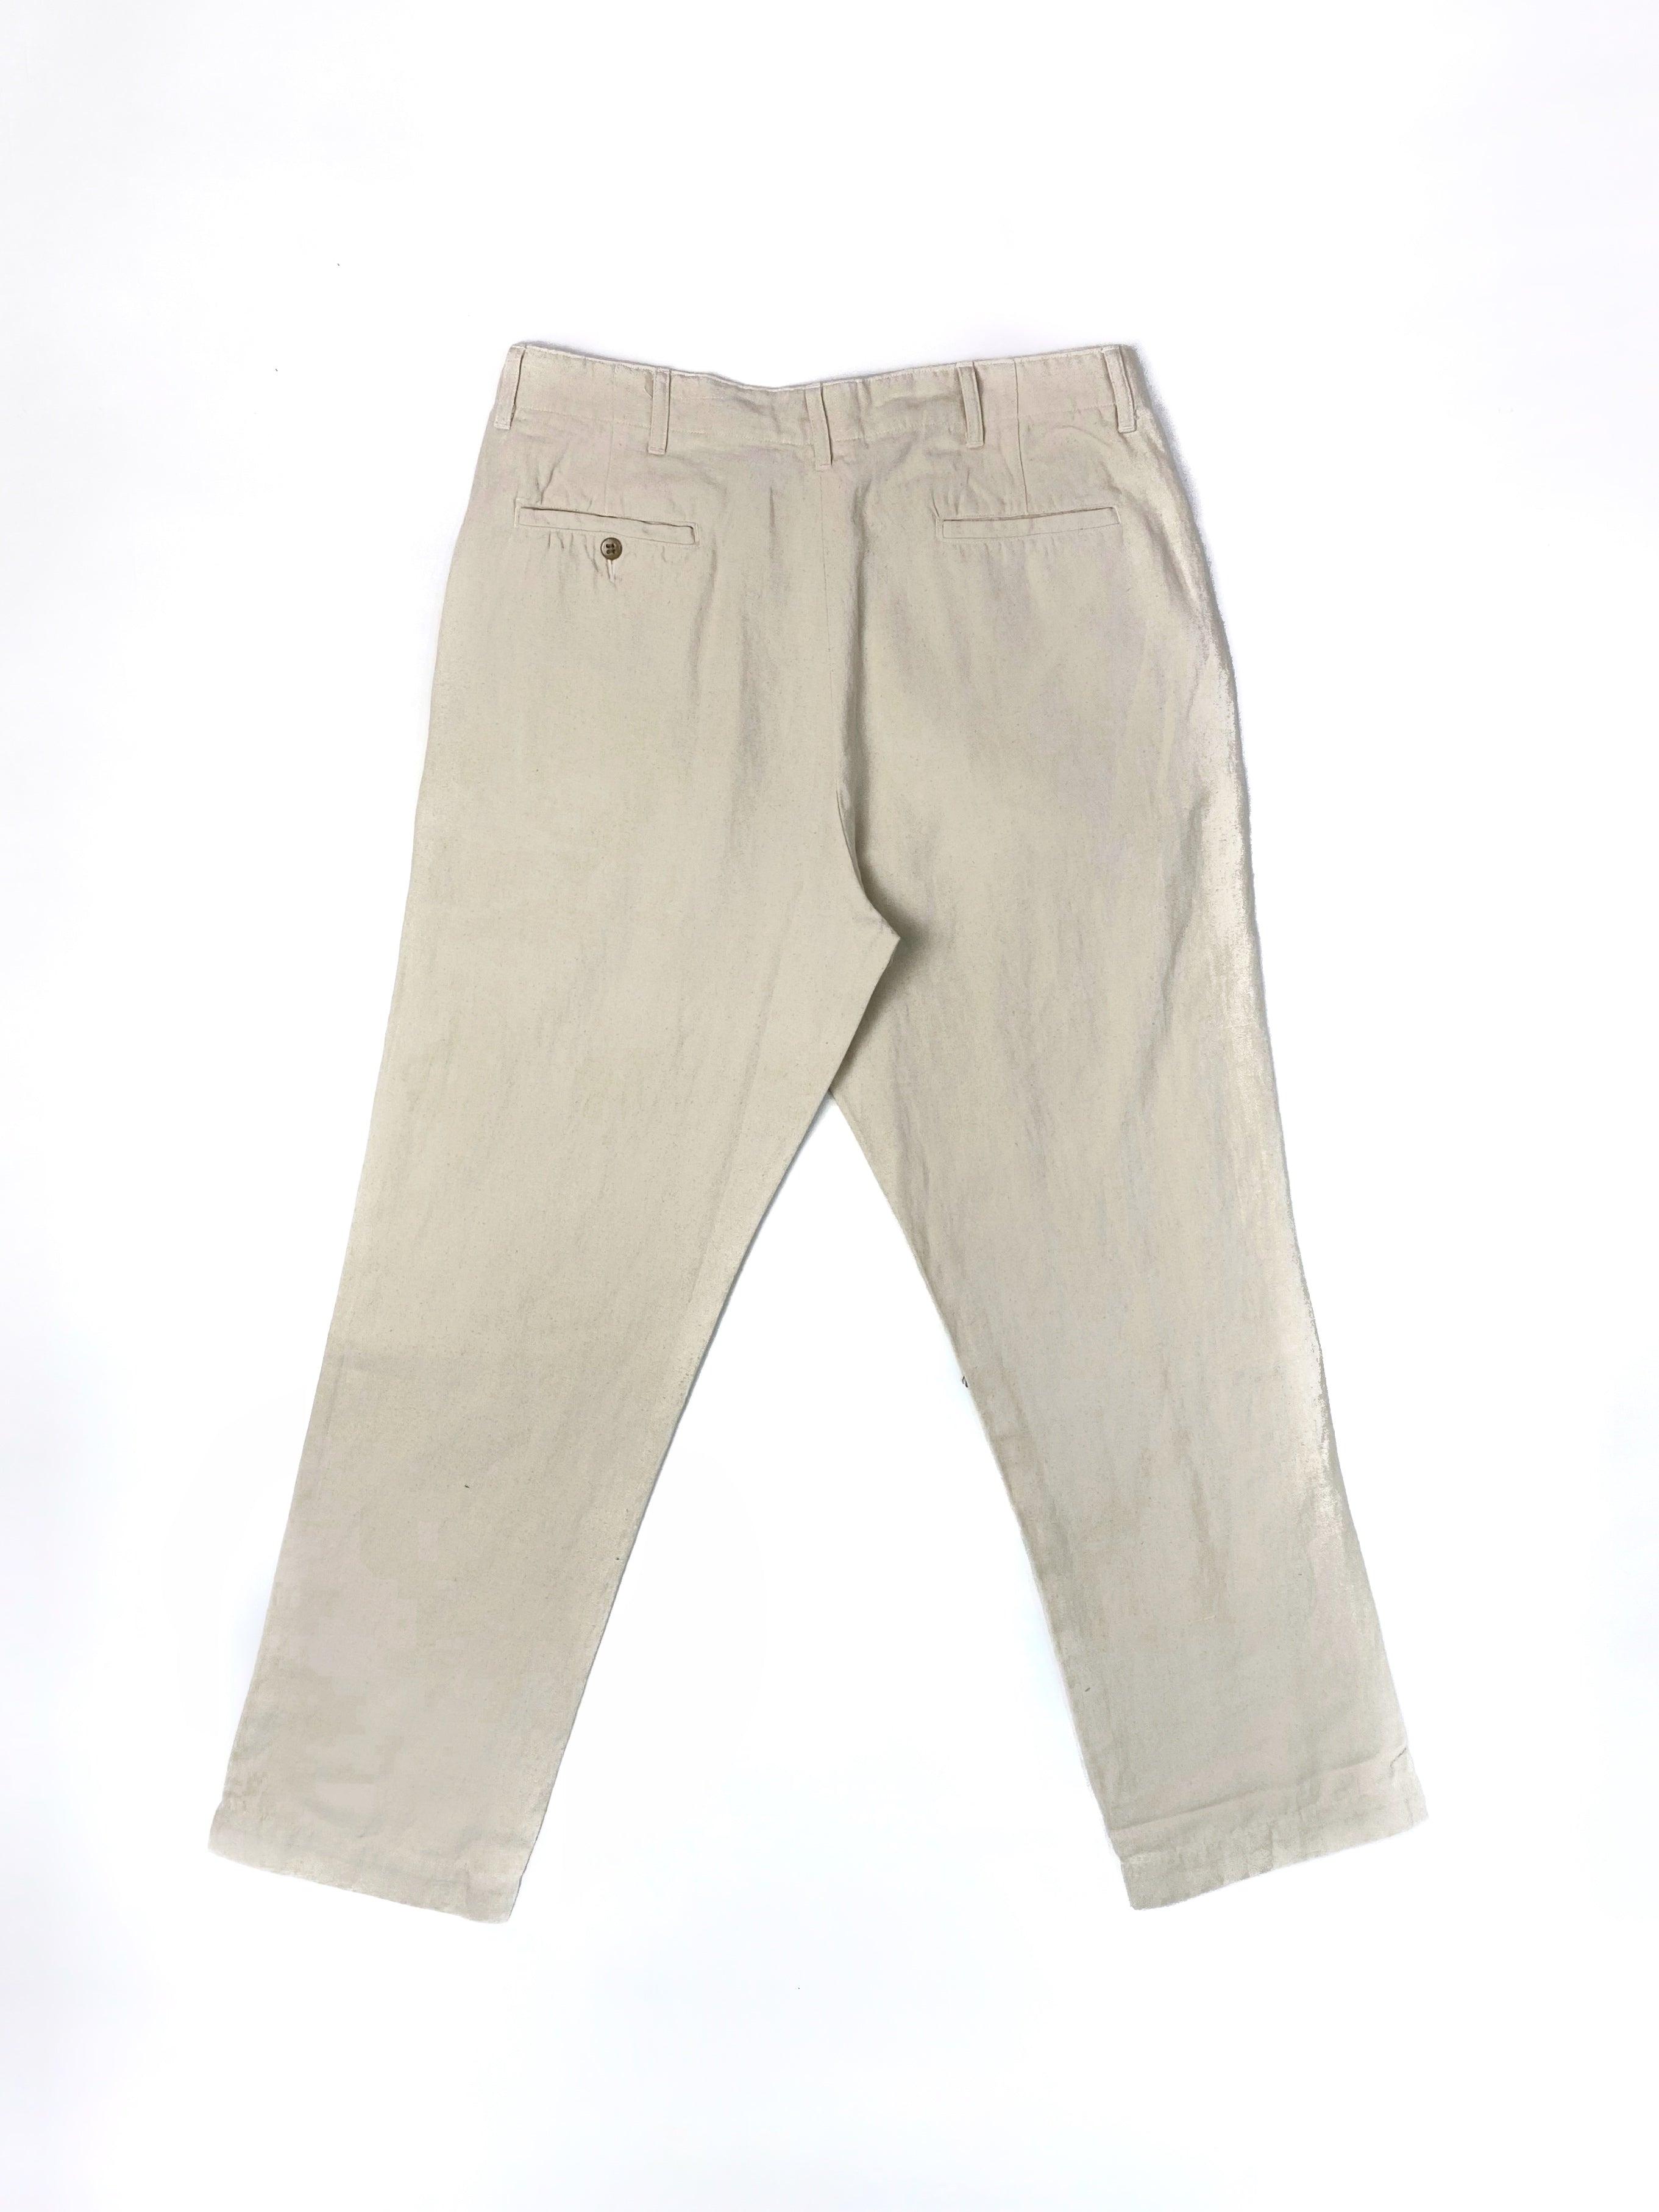 Pleated Cotton/ Linen Chinos | Unbleached